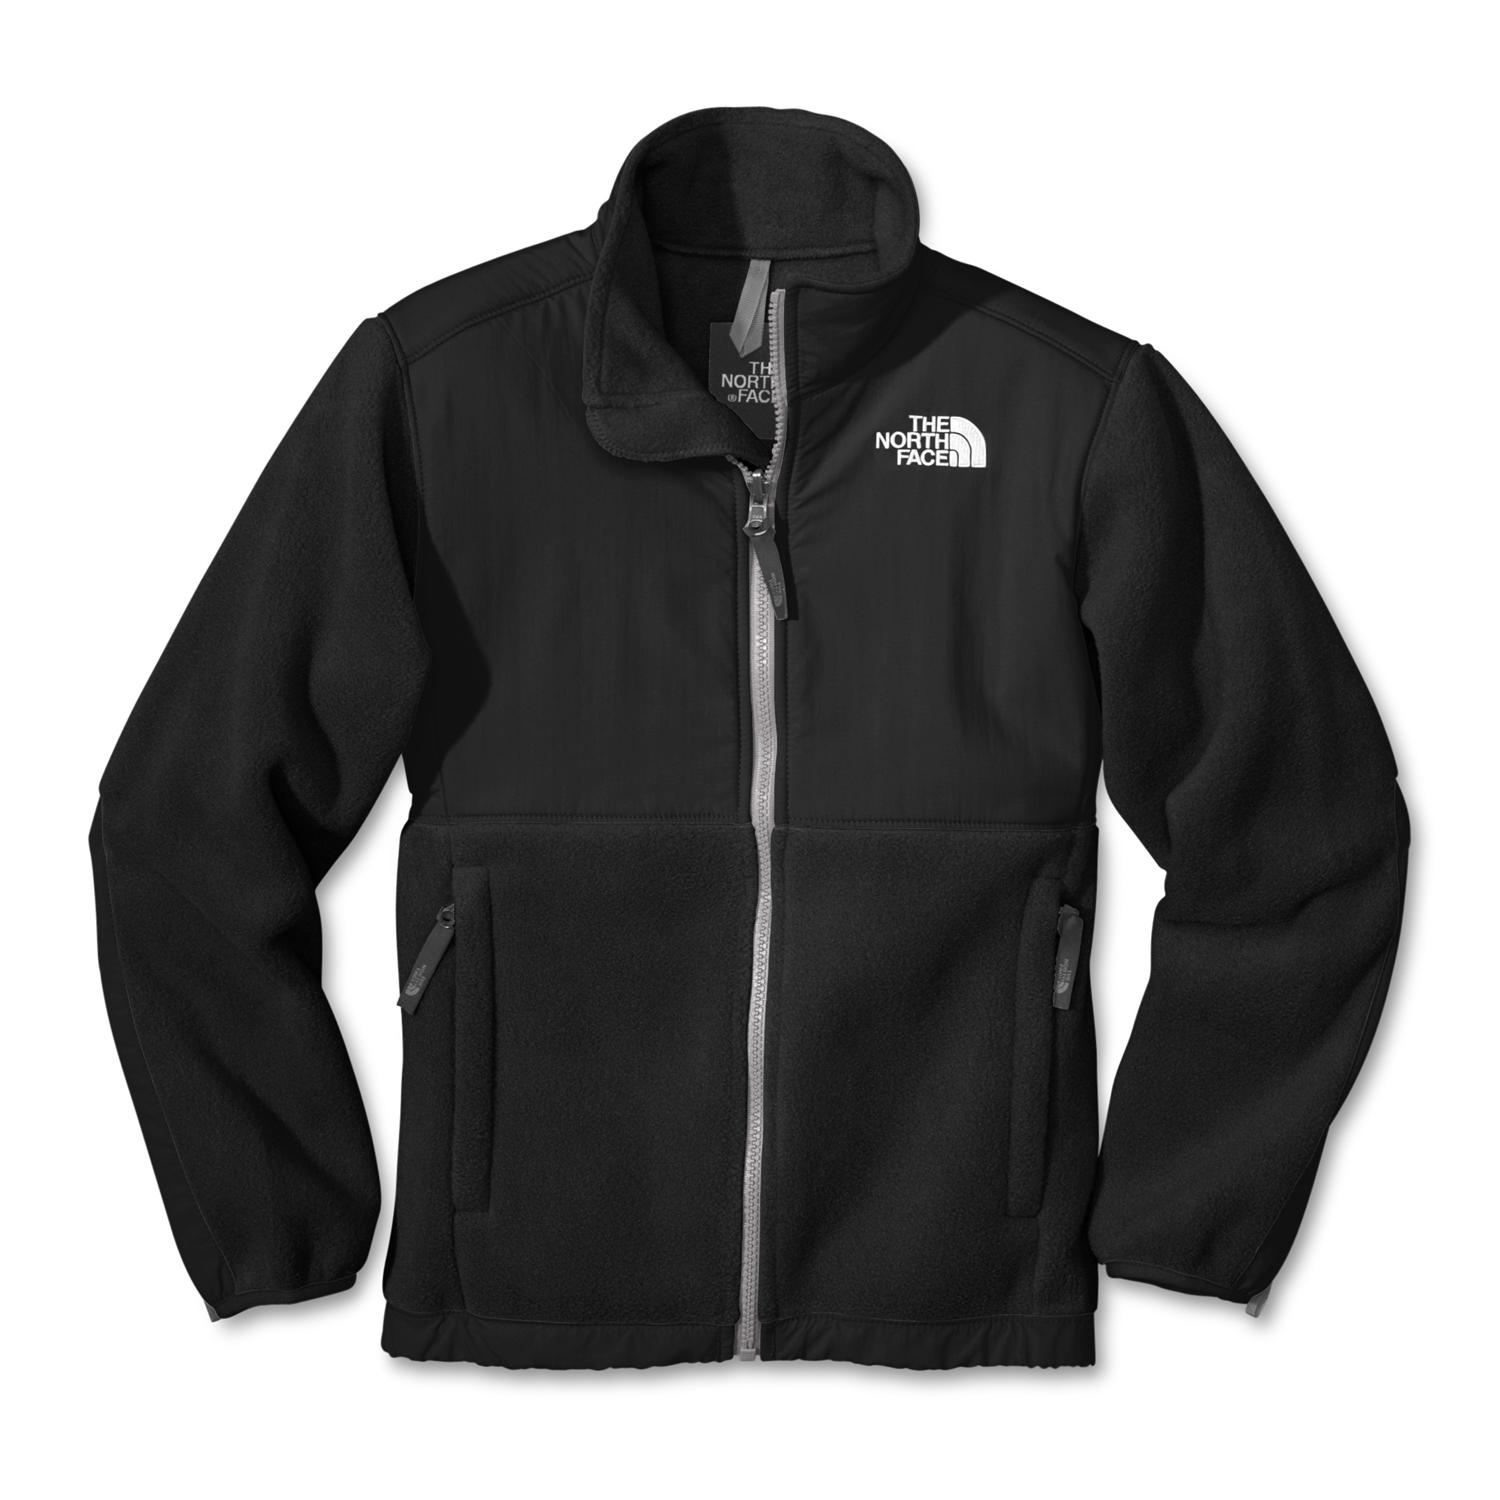 The North Face Denali Jacket - Girl's | evo outlet